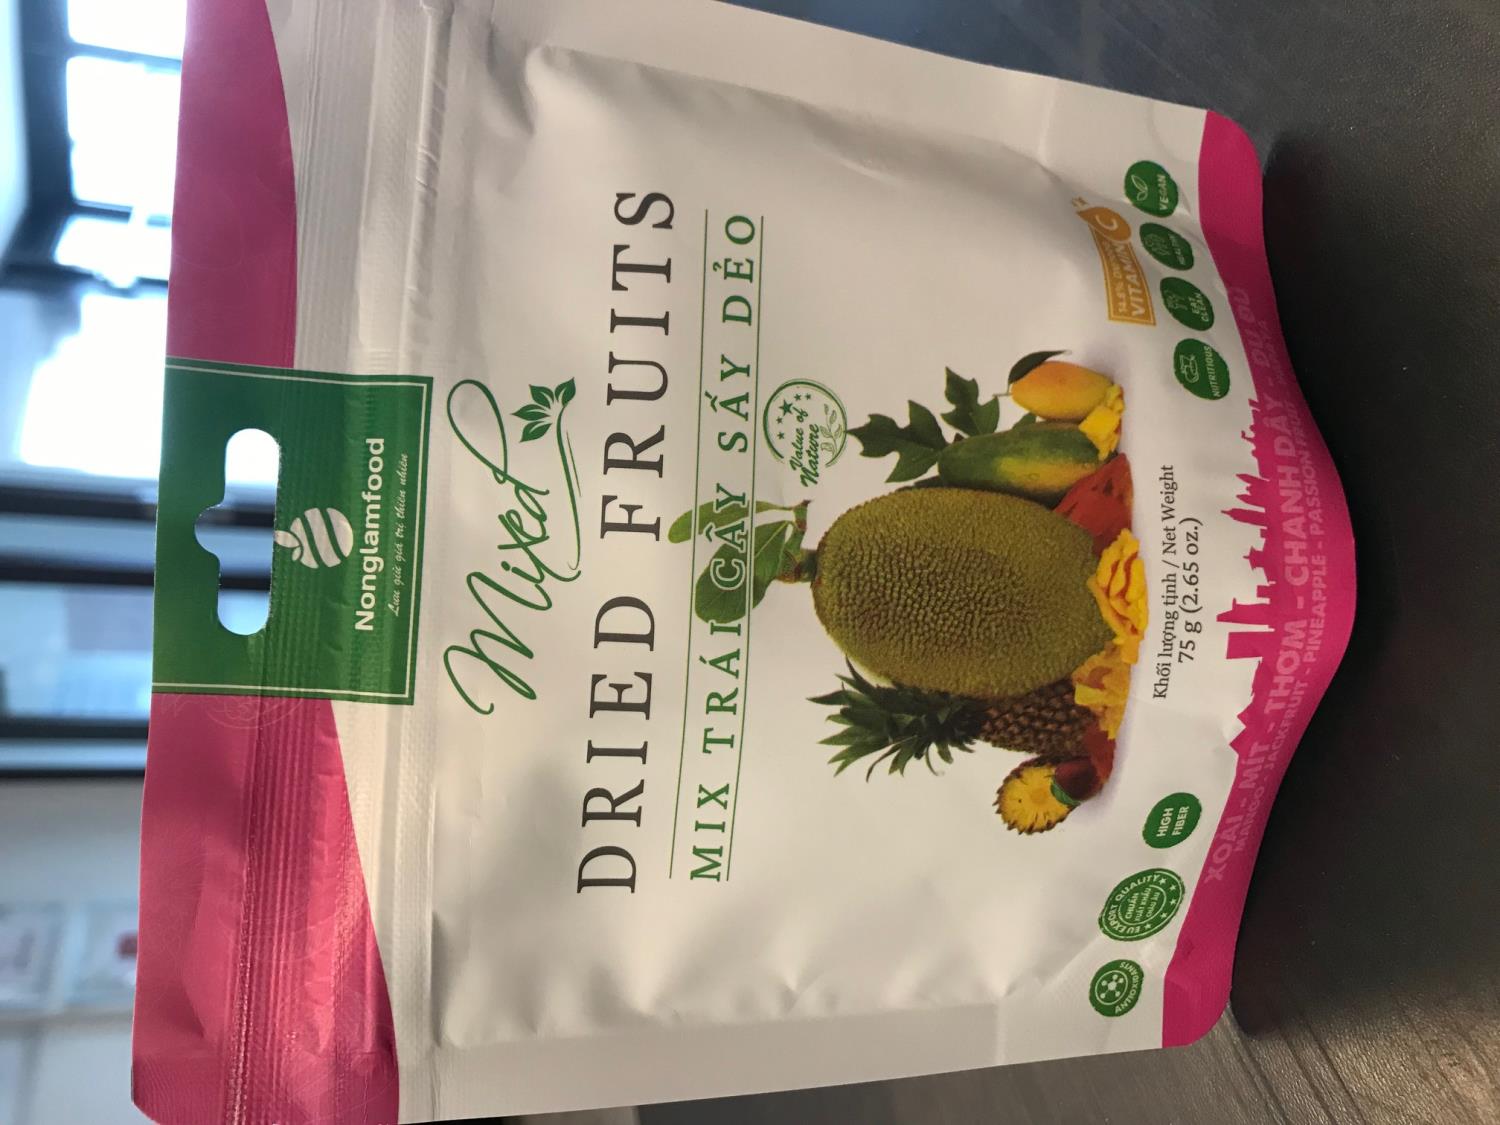 NLF Soft Dried Mixed Fruits 75G 富农混合果干75克